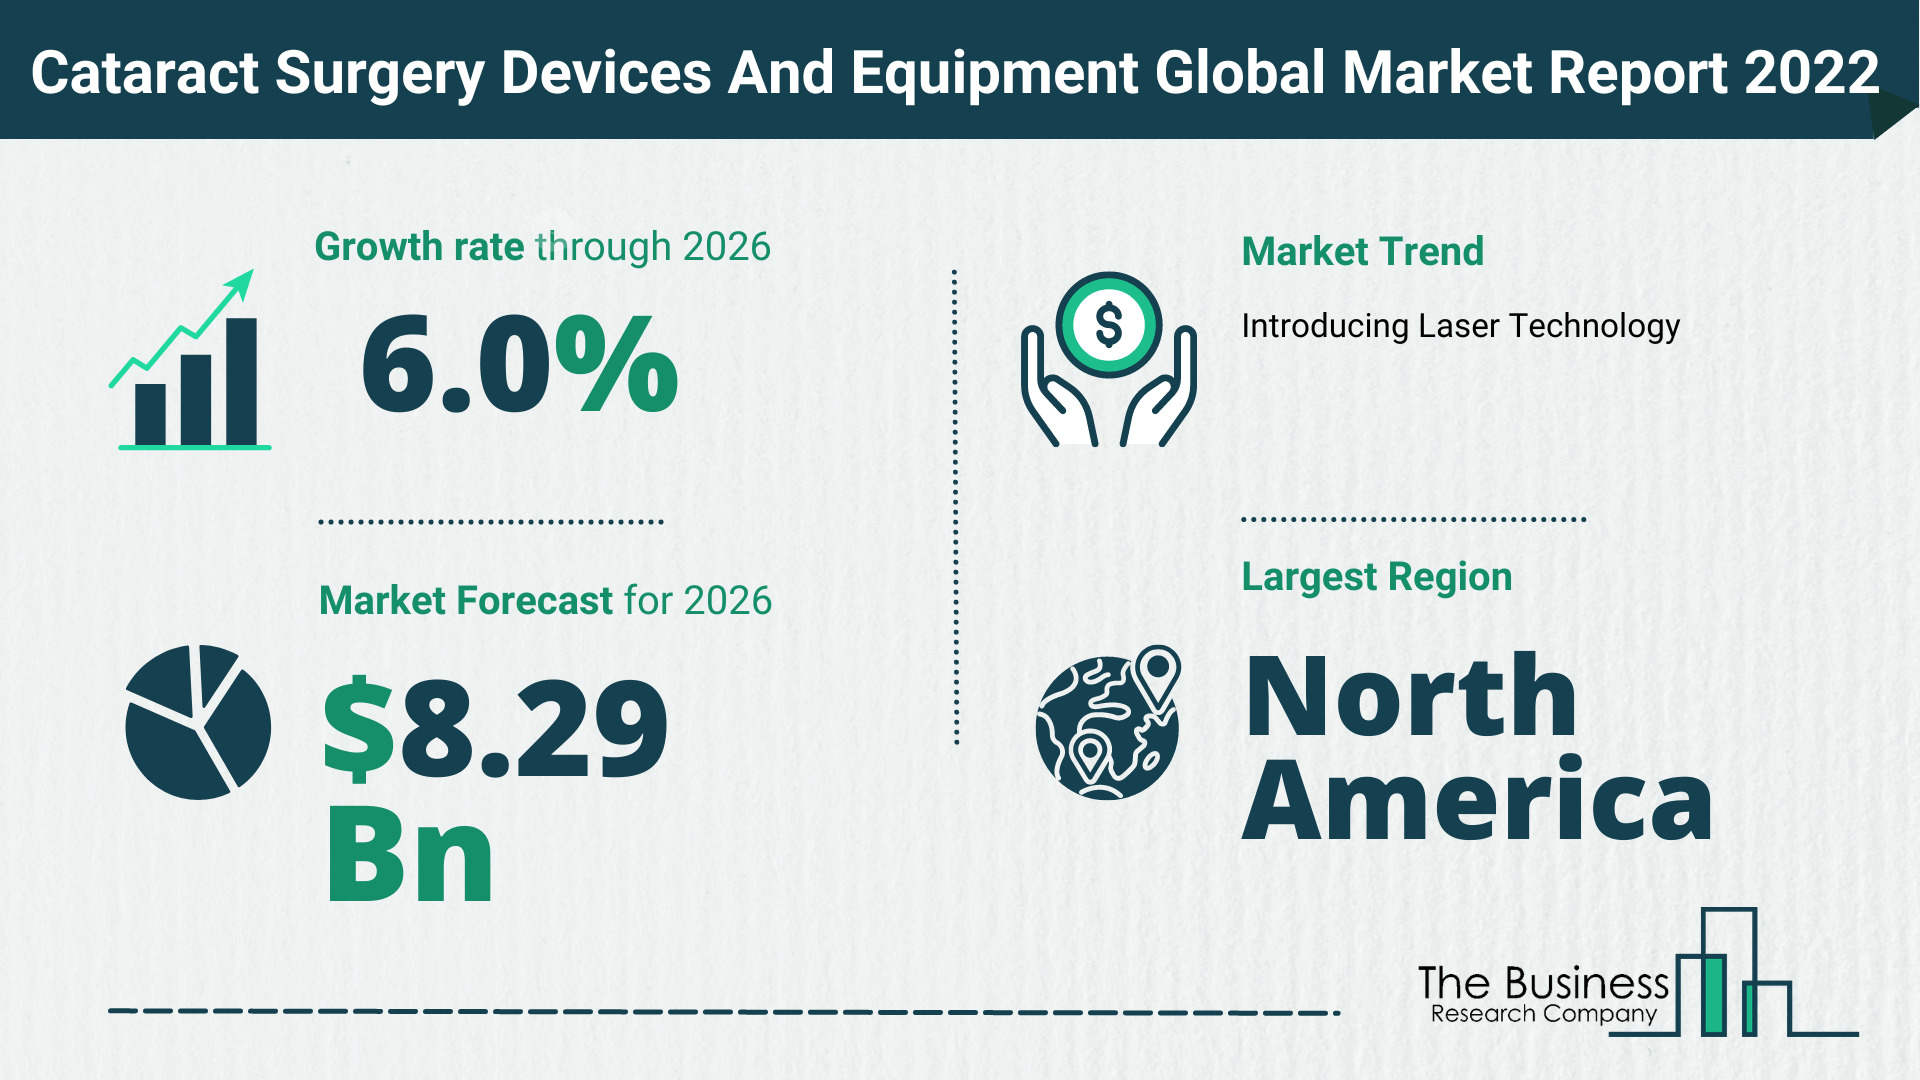 The Cataract Surgery Devices And Equipment Market Share, Market Size, And Growth Rate 2022